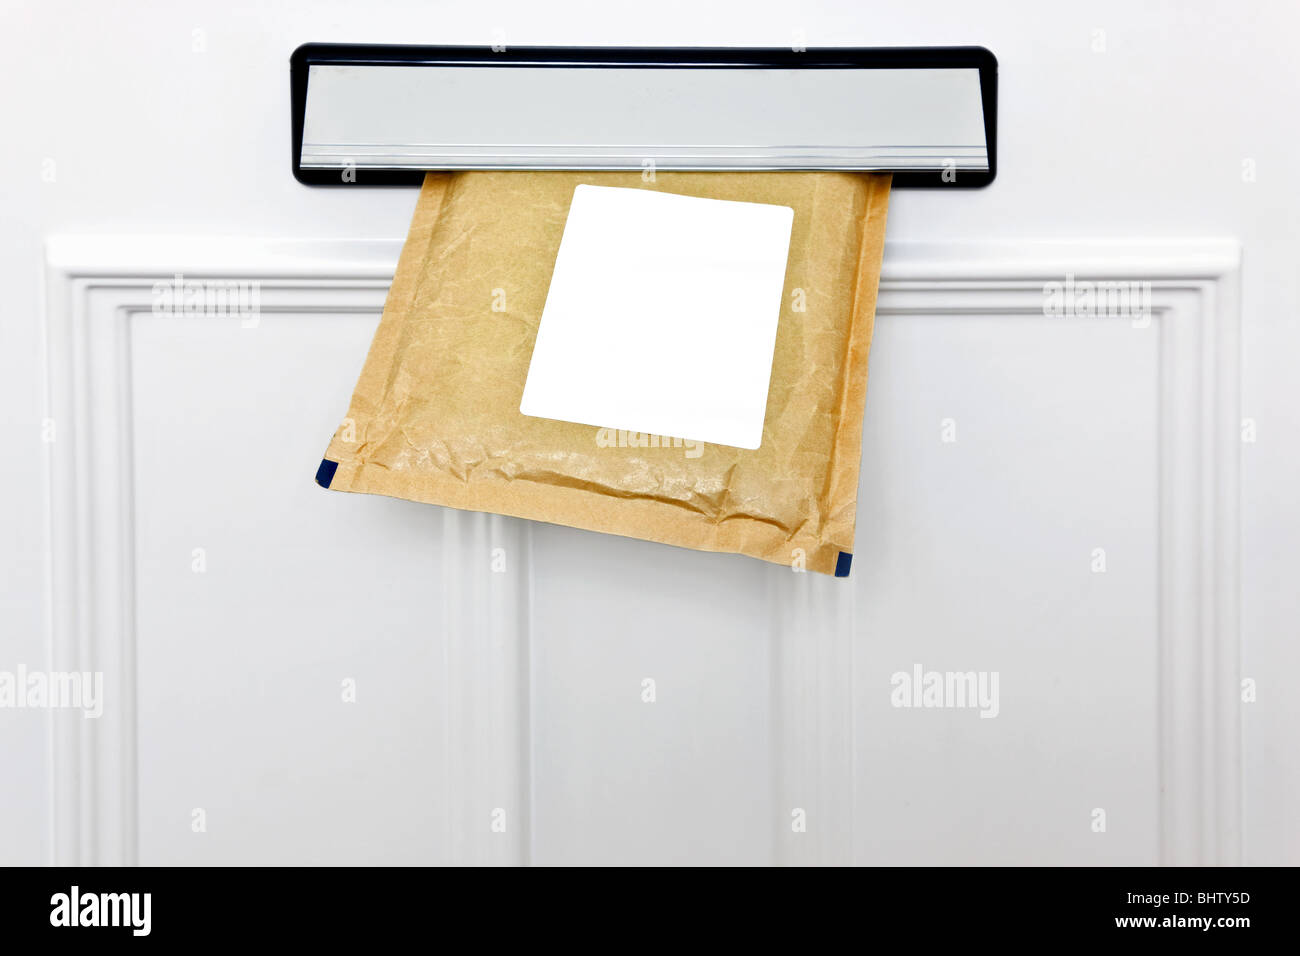 A padded envelope in the letterbox of a white front door, blank label for you to add your own name and address. Stock Photo